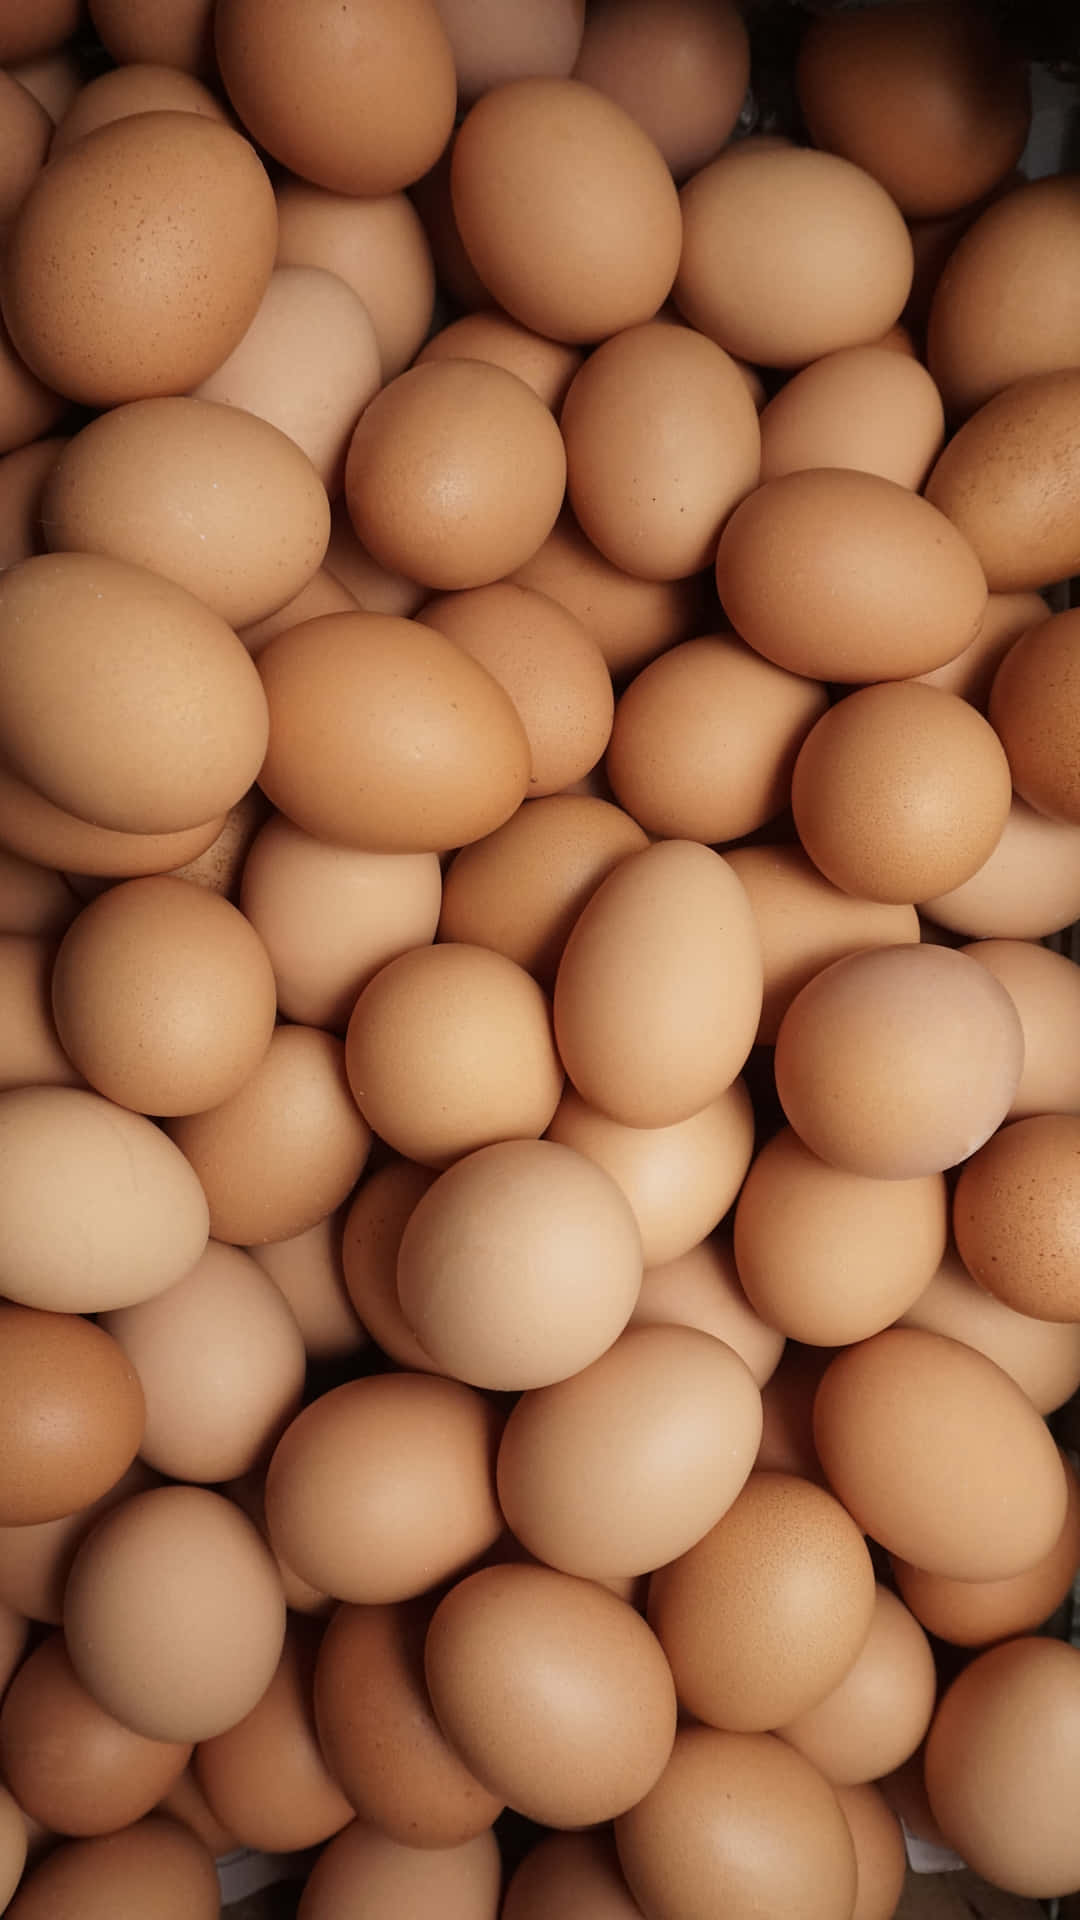 A Close Up Of A Bunch Of Brown Eggs